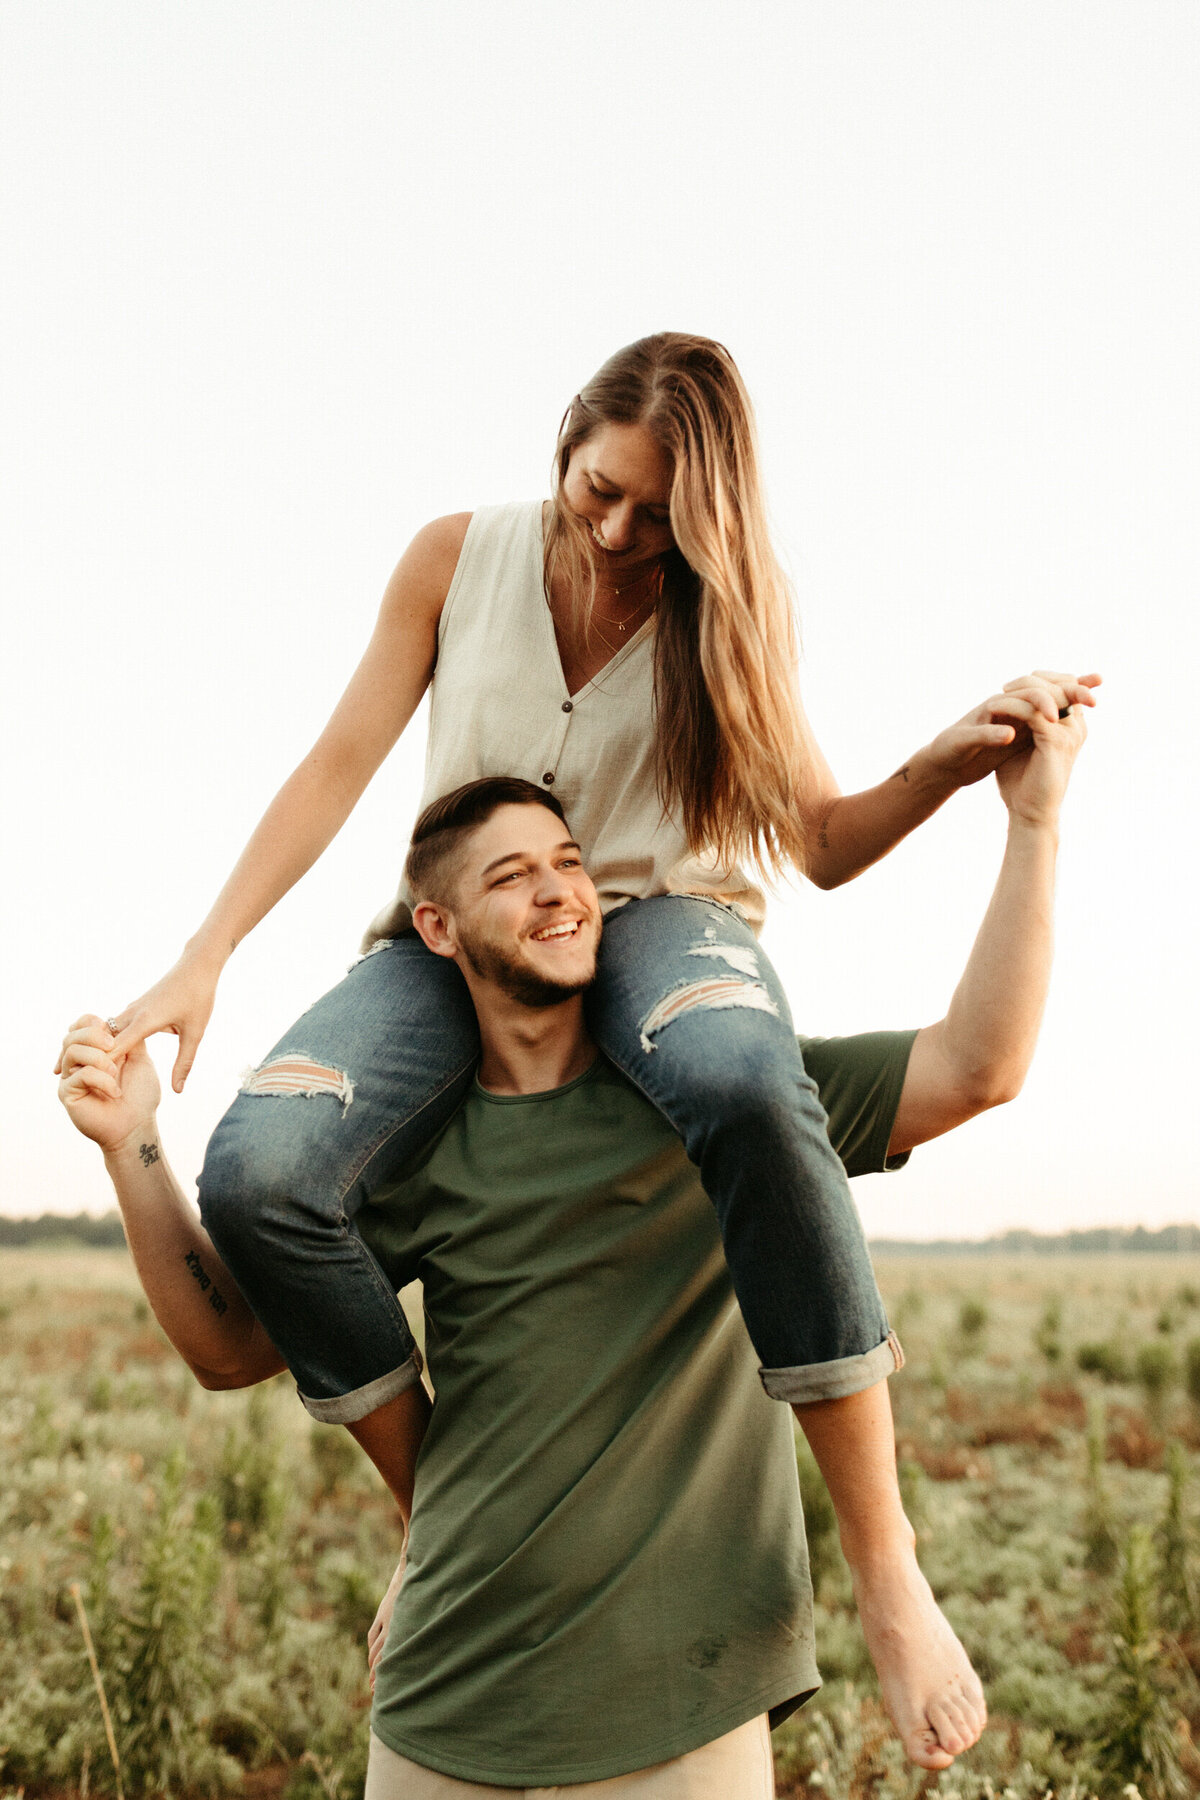 A girl is on top of a guy's shoulders as they hold hands and laugh together in a field.